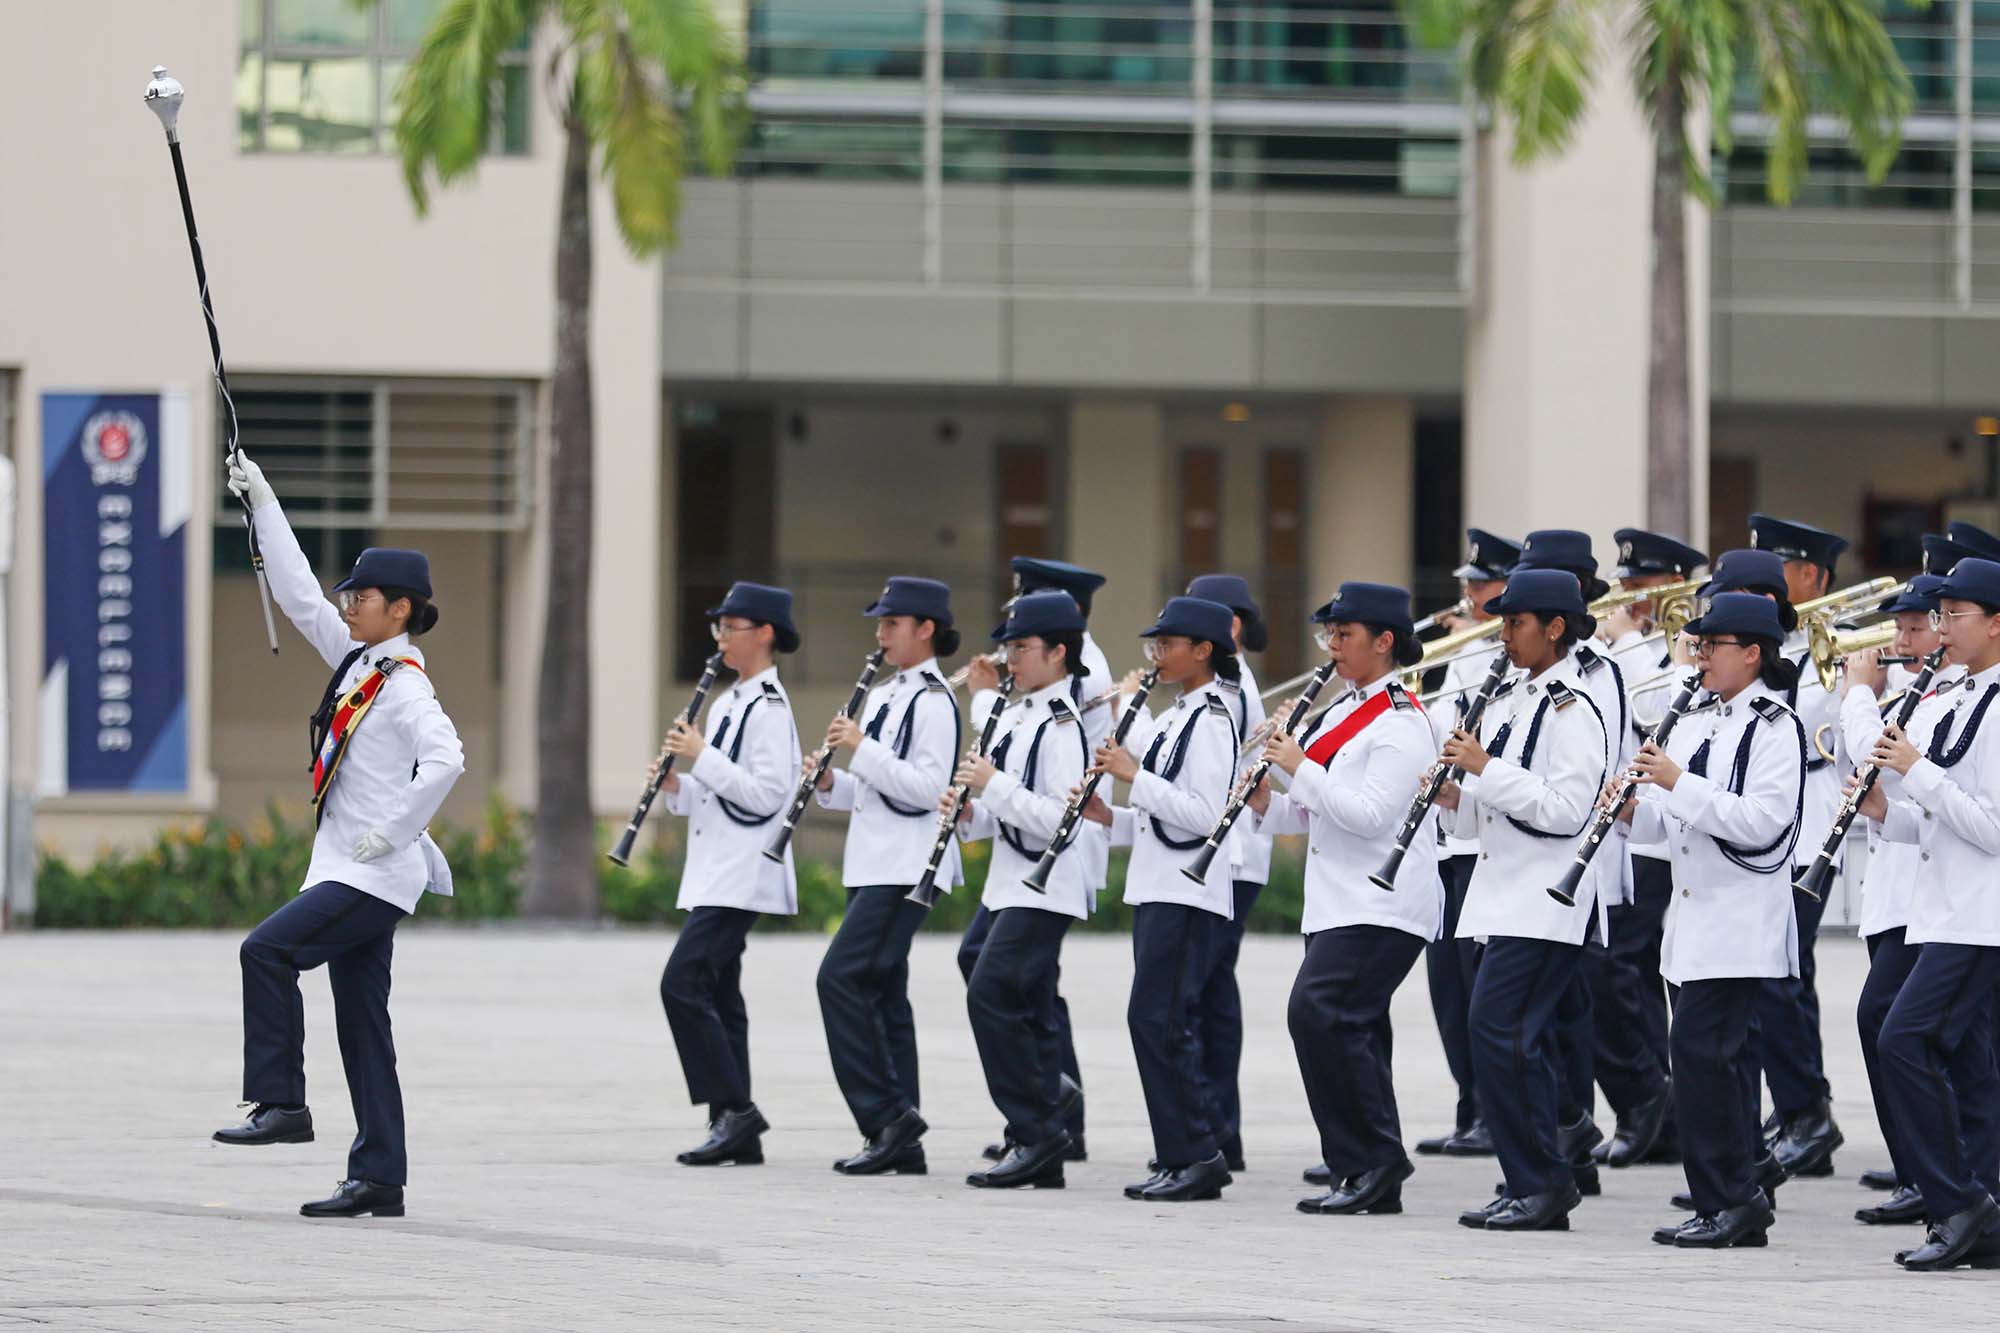 A sterling performance by the NPCC Band from Yishun Town Secondary School. PHOTO: Ryan Yeo